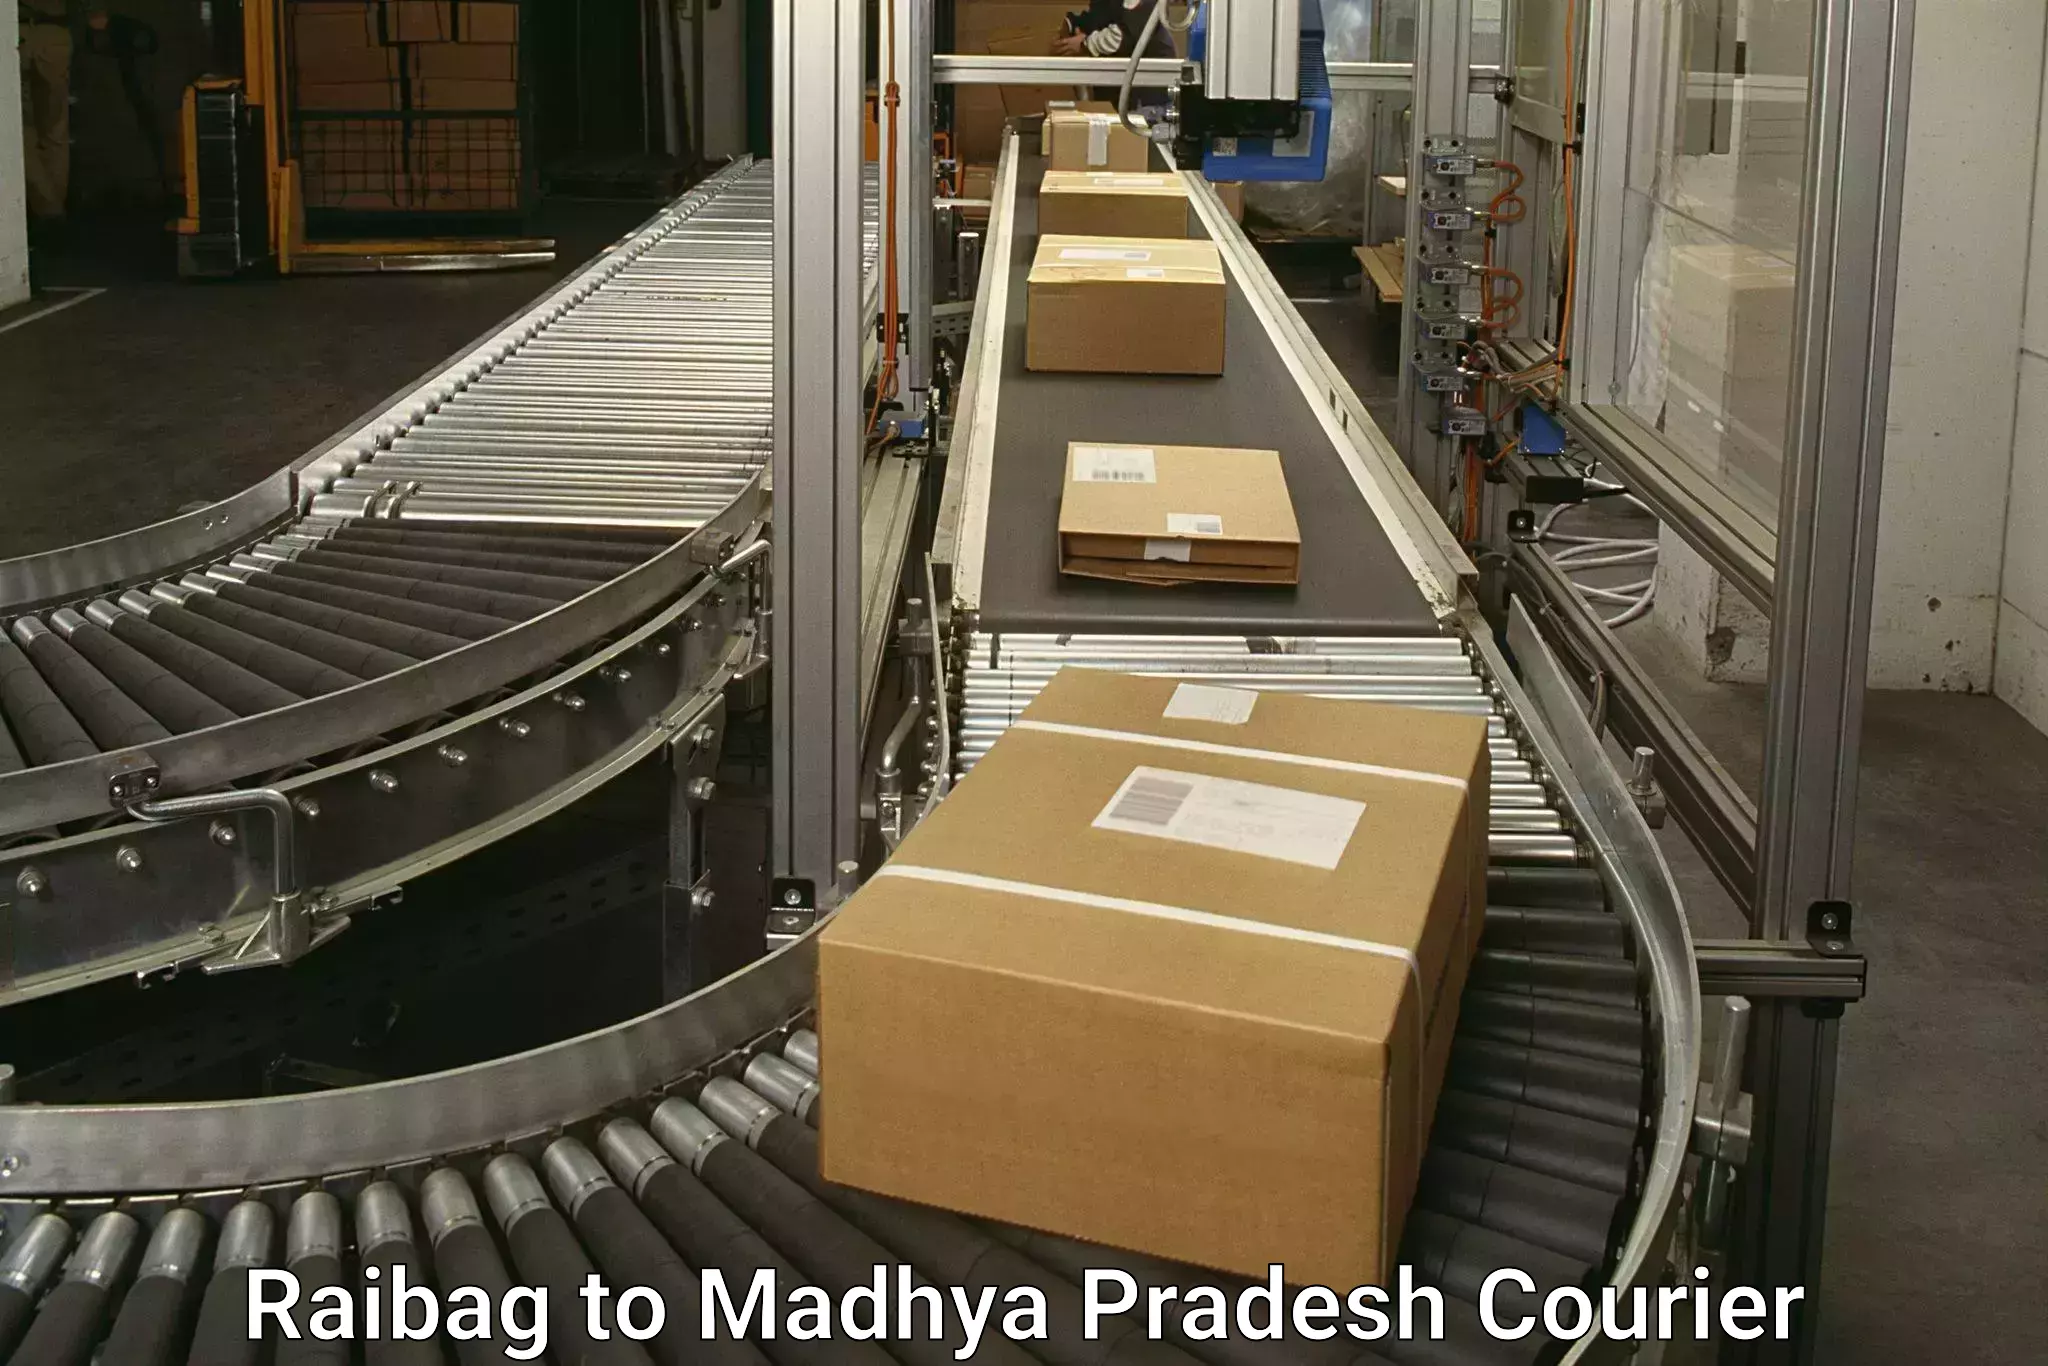 State-of-the-art courier technology Raibag to Dewas